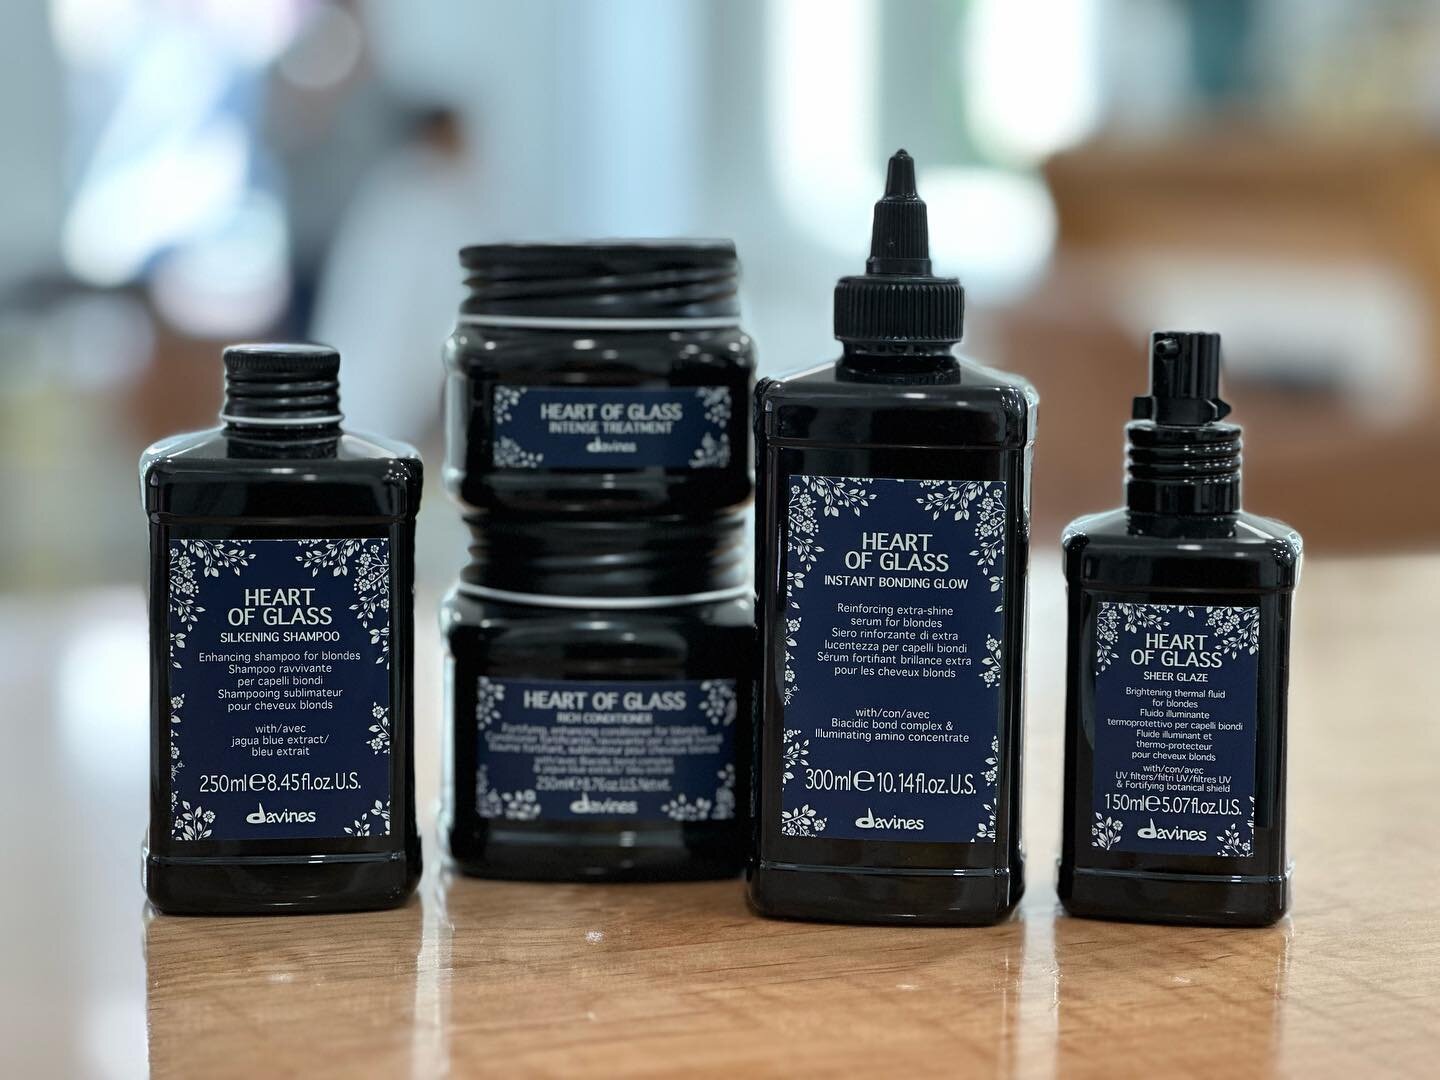 🔹New Heart of Glass Instant Bonding Glow🔹

Reinforcing instant extra-shine acting serum treatment for natural and colored blondes. Stop by and pick yours up now! 

#davines #heartofglass #metropolisdcsalon